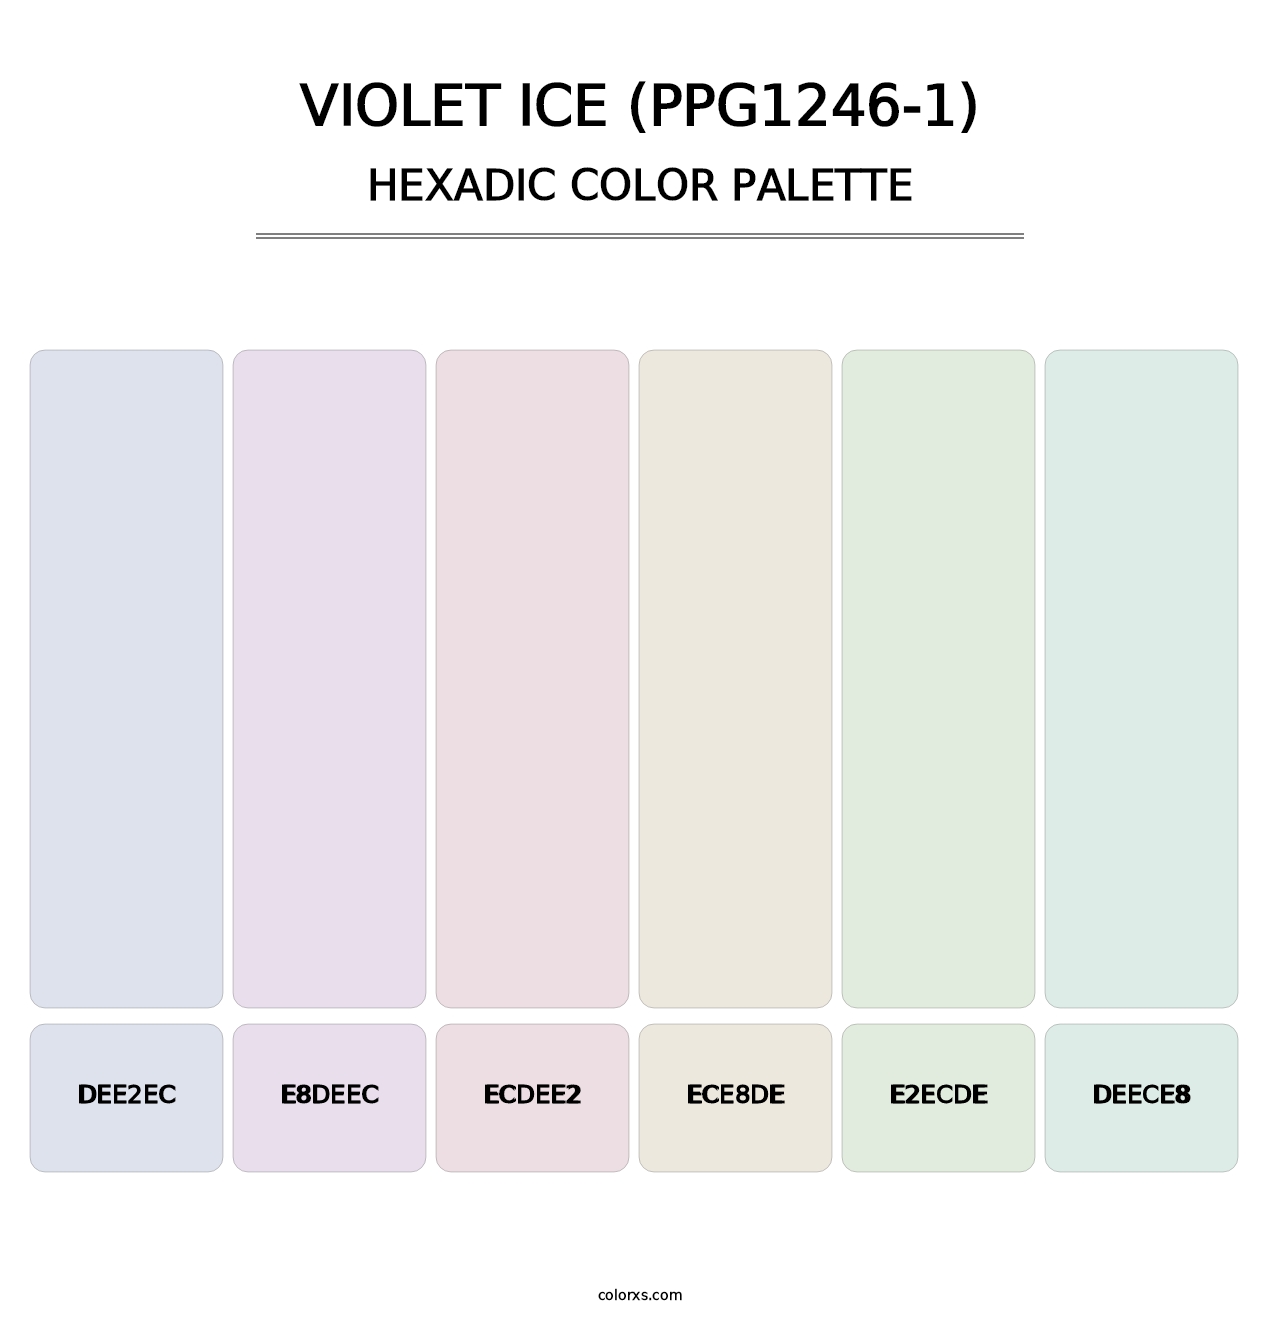 Violet Ice (PPG1246-1) - Hexadic Color Palette